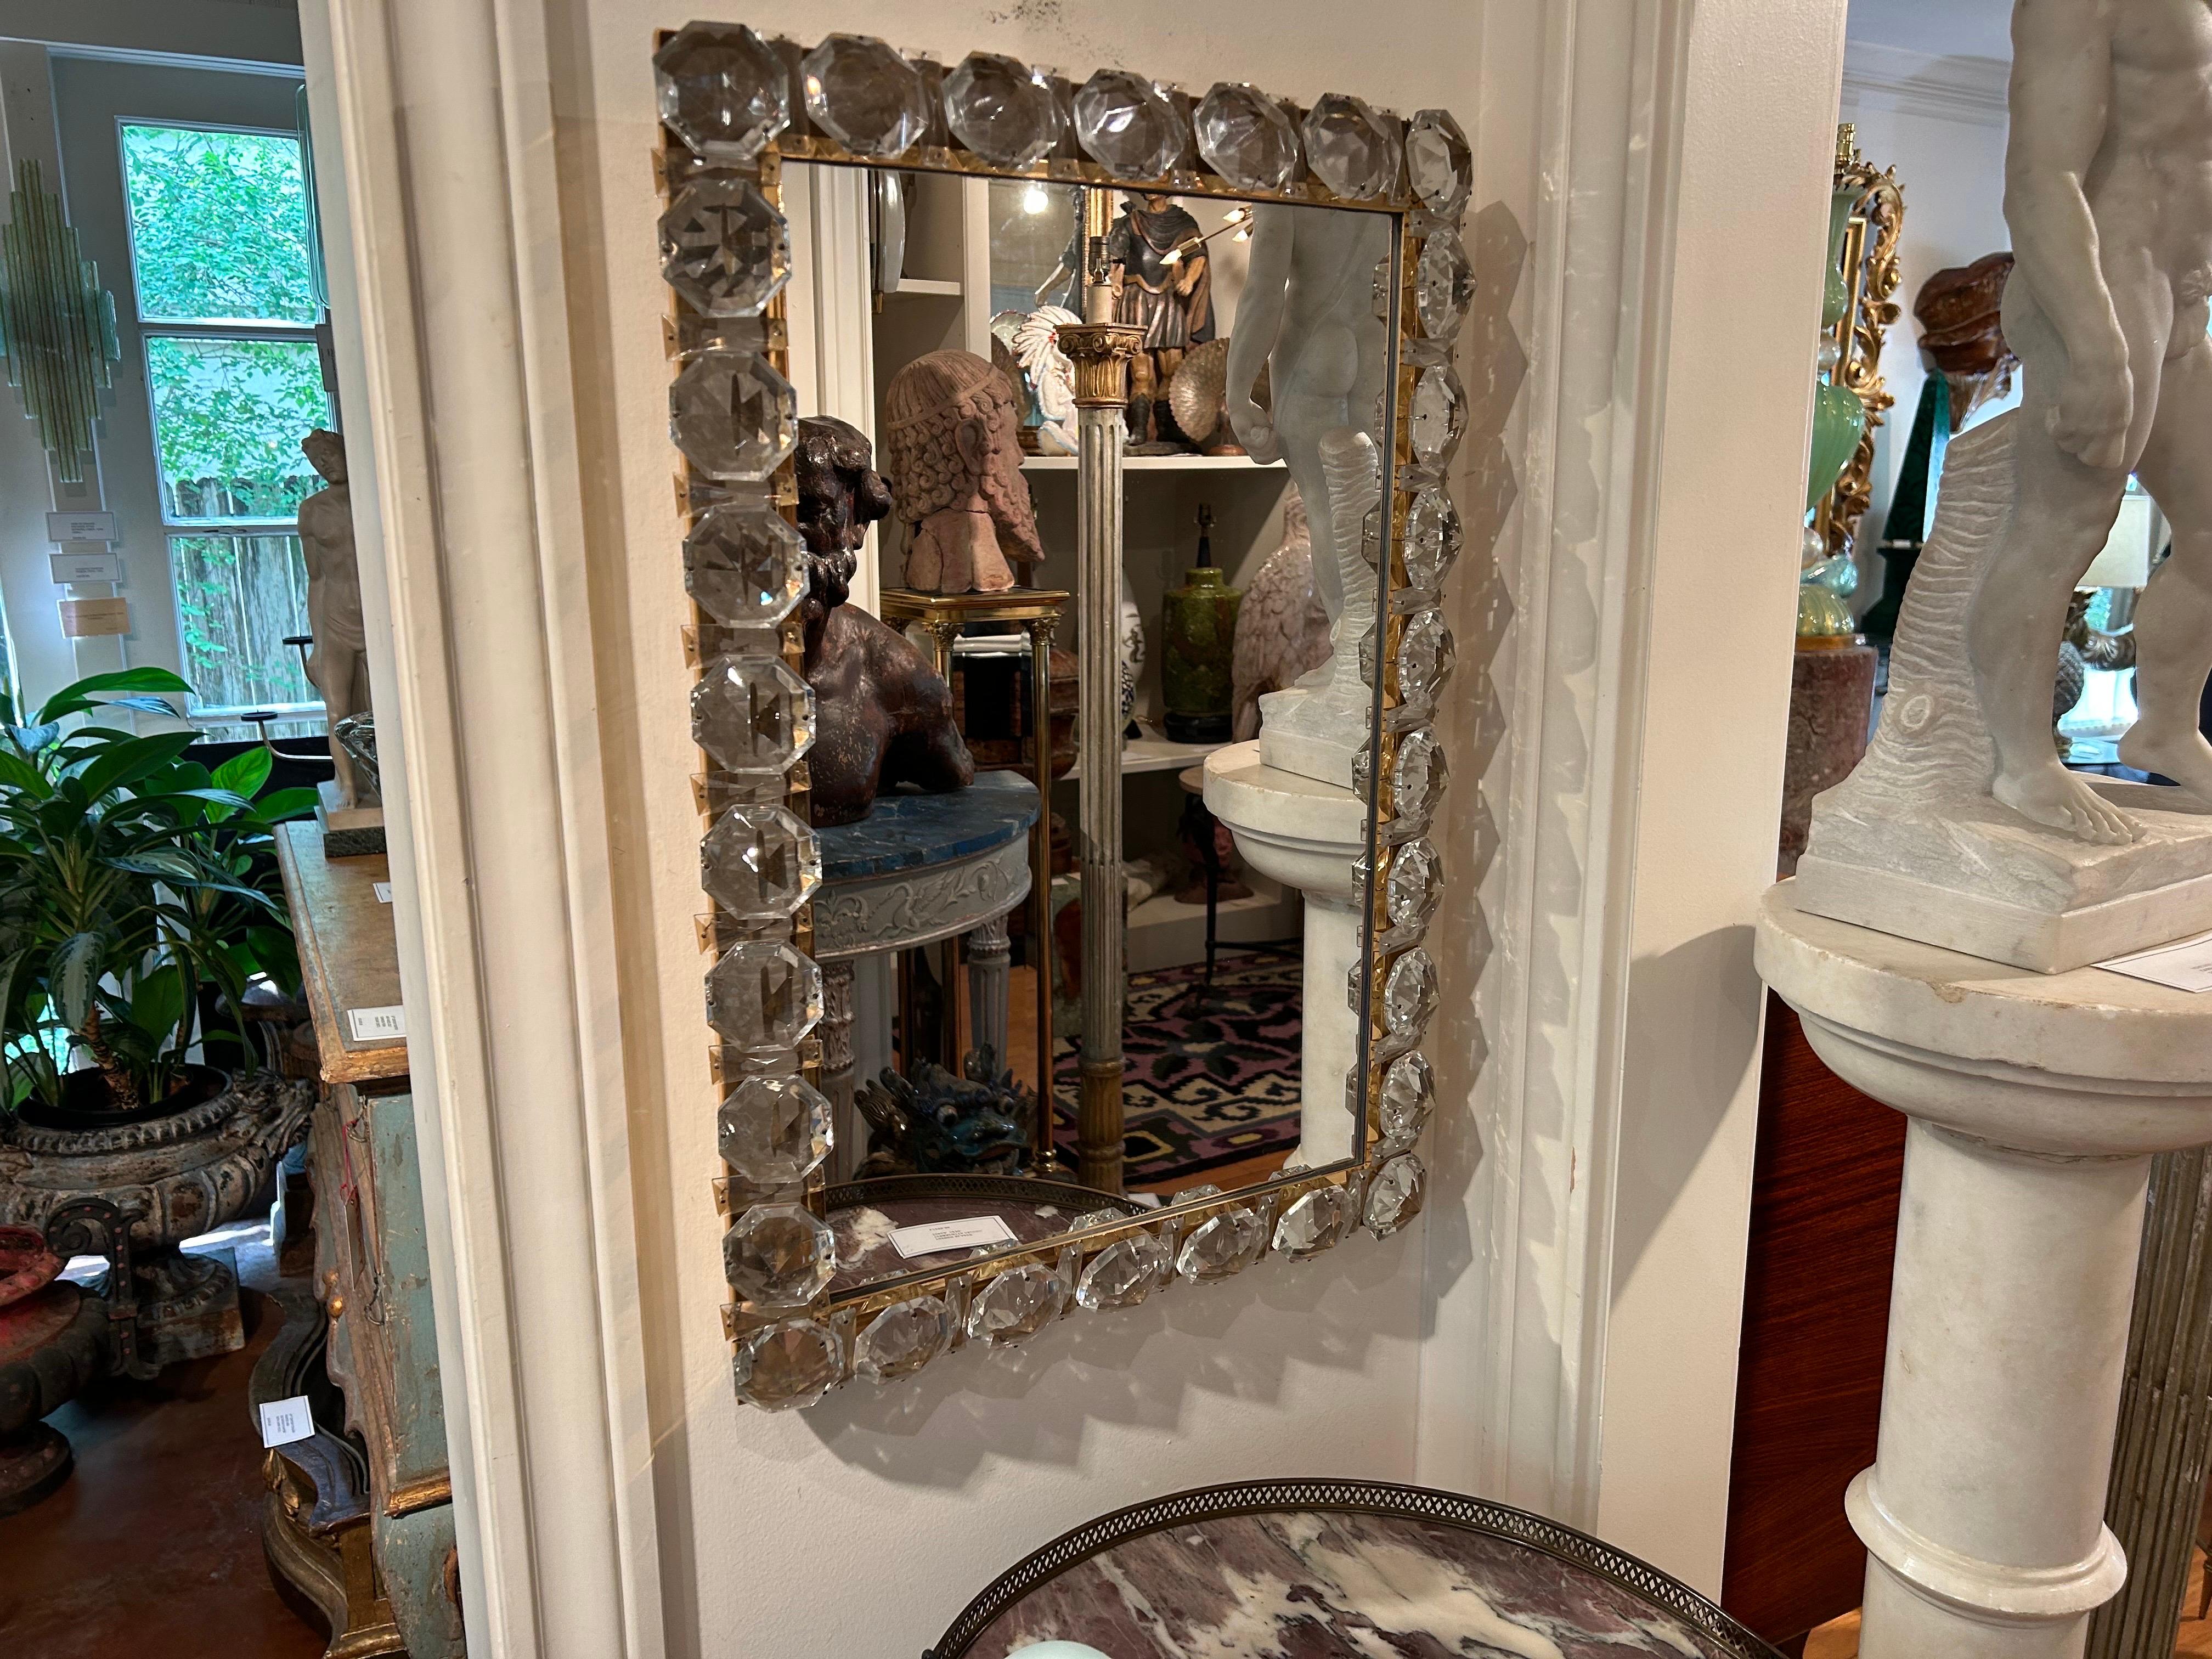 Vintage Brass And Crystal Mirror By Palwa.
This expertly executed Hollywood Regency mirror has a beautiful thick brass frame with huge 2.5 inch crystals around the perimeter.
Our stunning crystal mirror is the perfect candidate for a glamorous